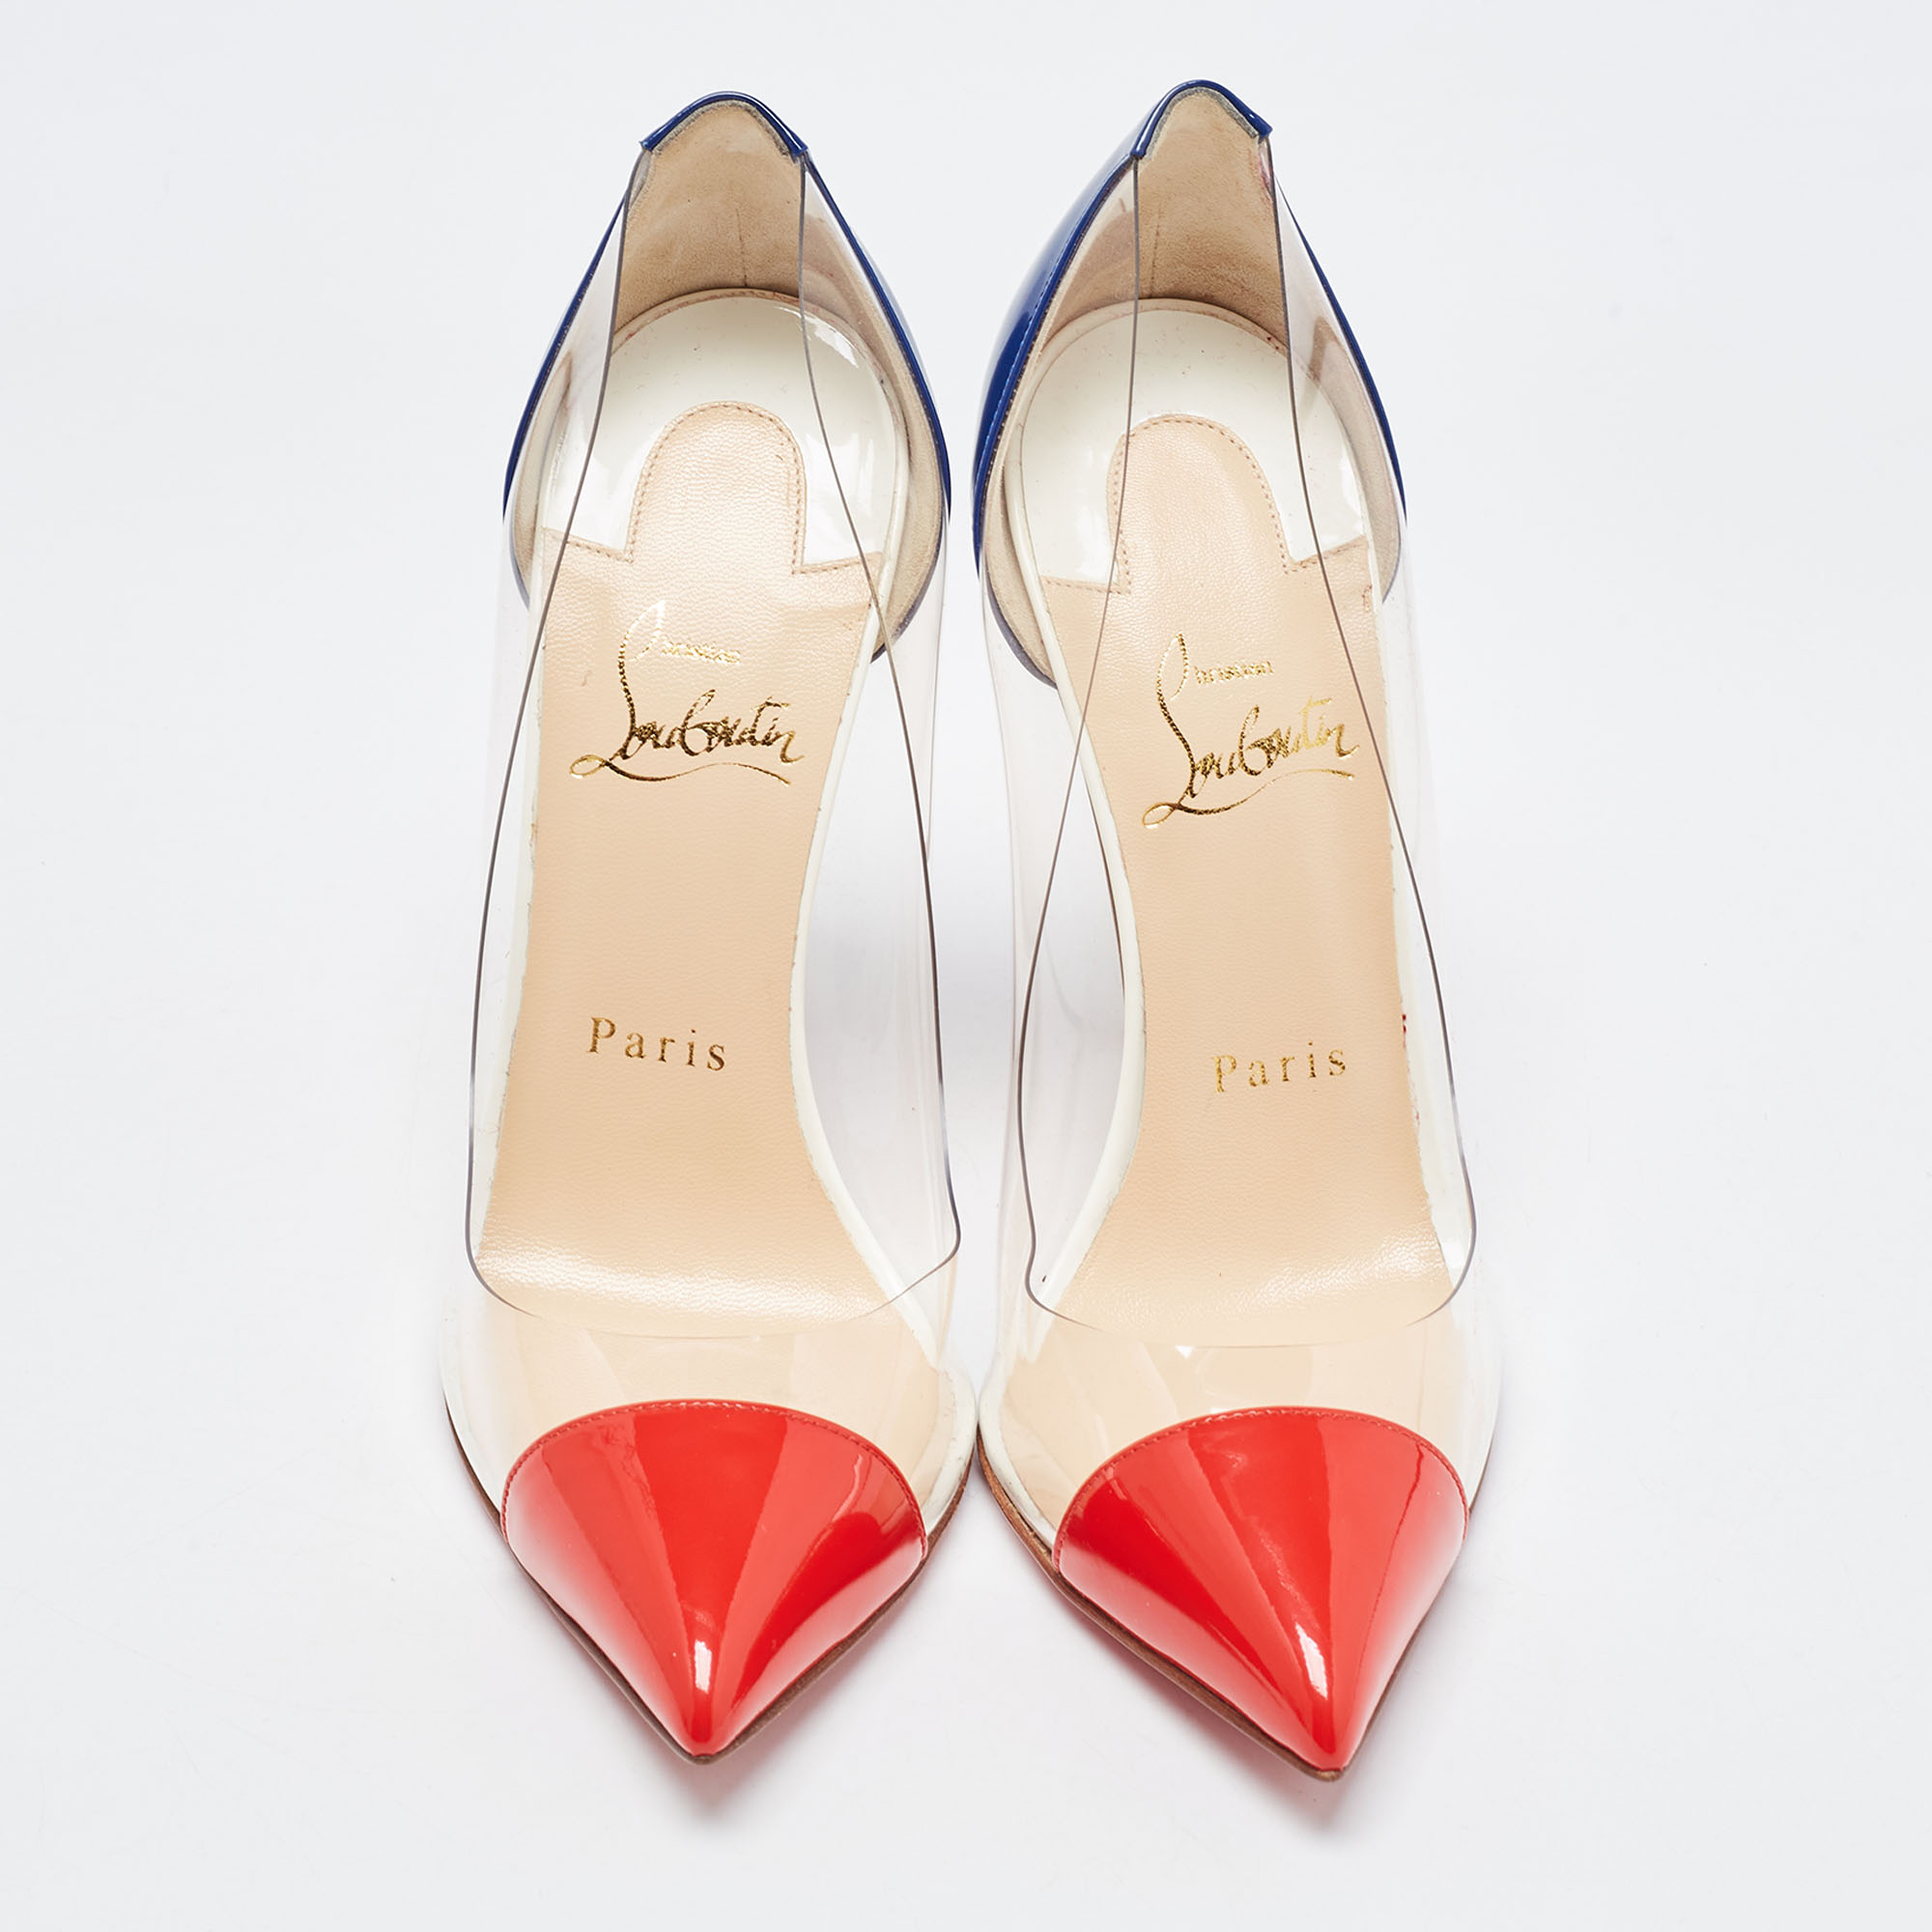 Christian Louboutin Red/Blue Patent Leather And PVC Debout Pumps Size 37